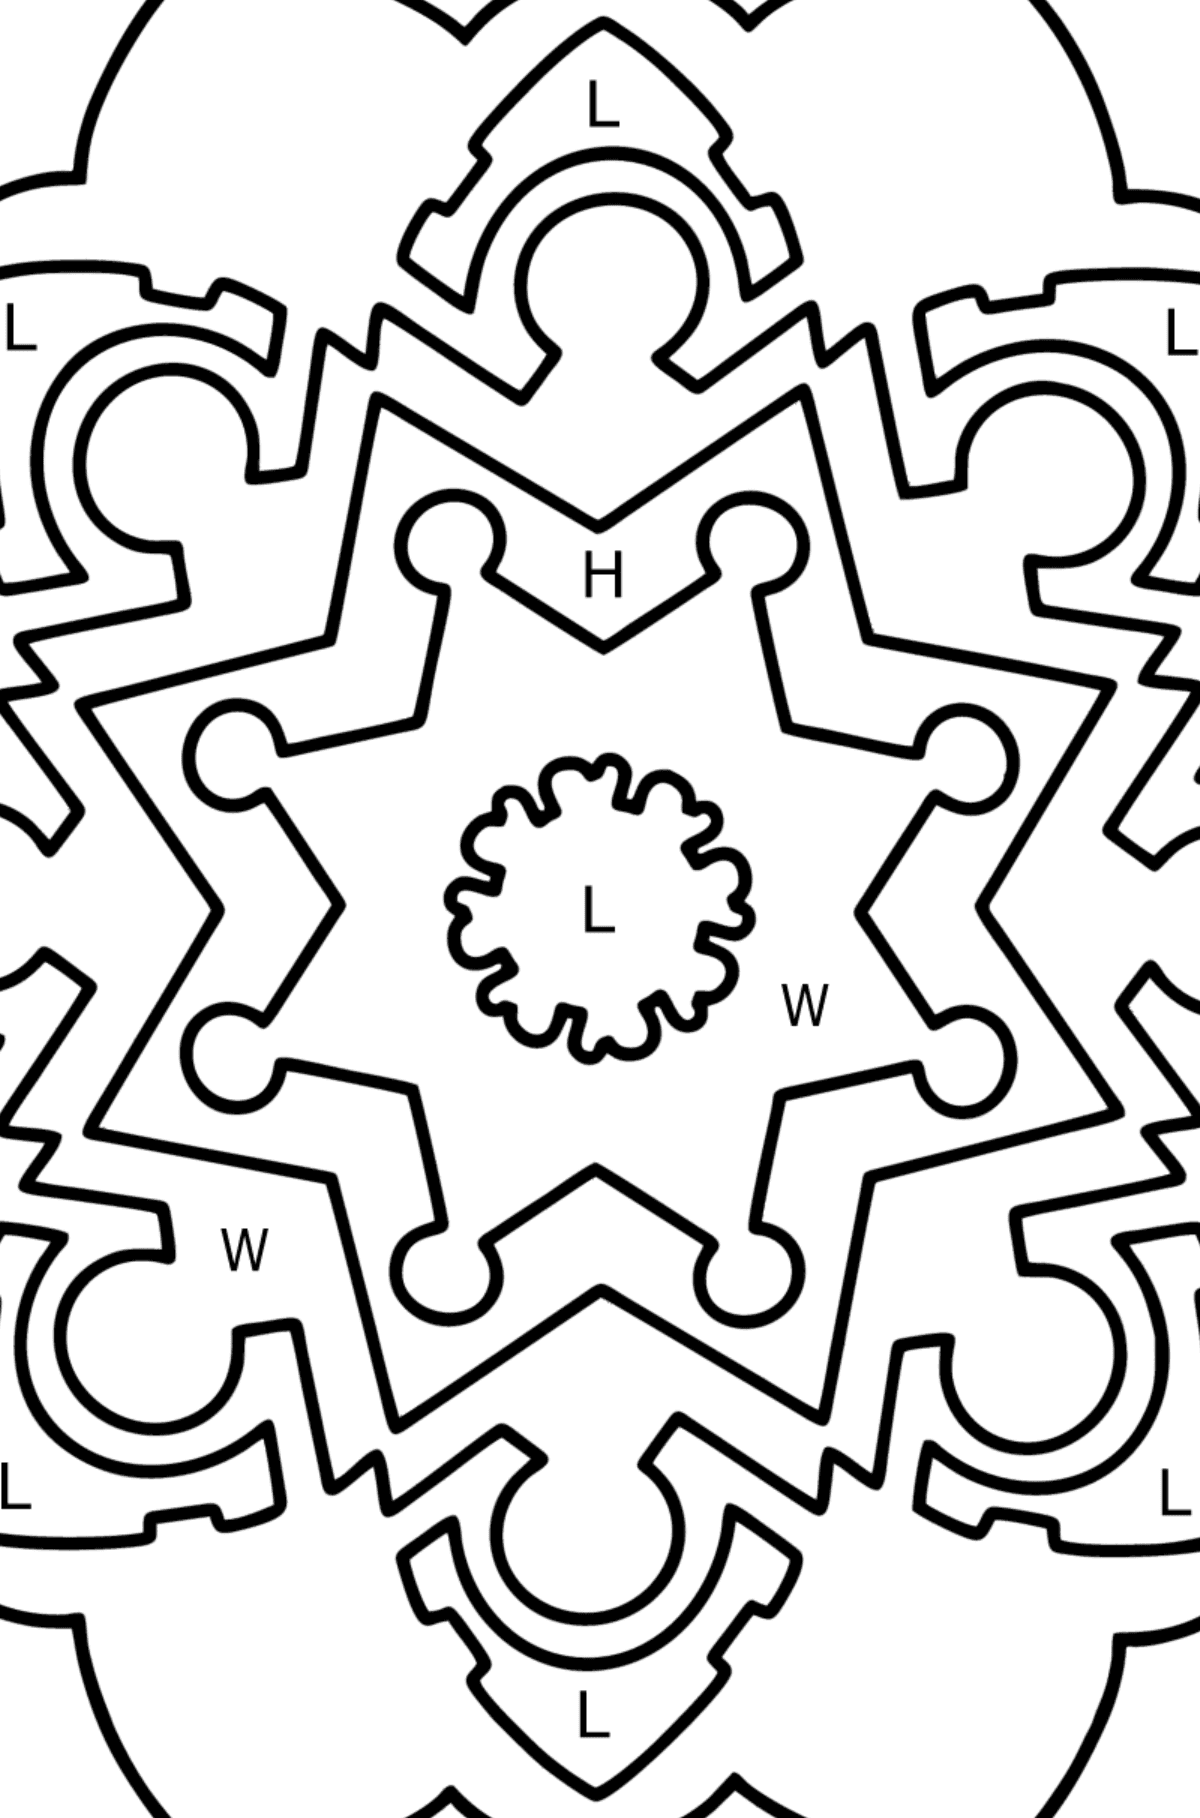 Mandala coloring page - 13 parts - Coloring by Letters for Kids